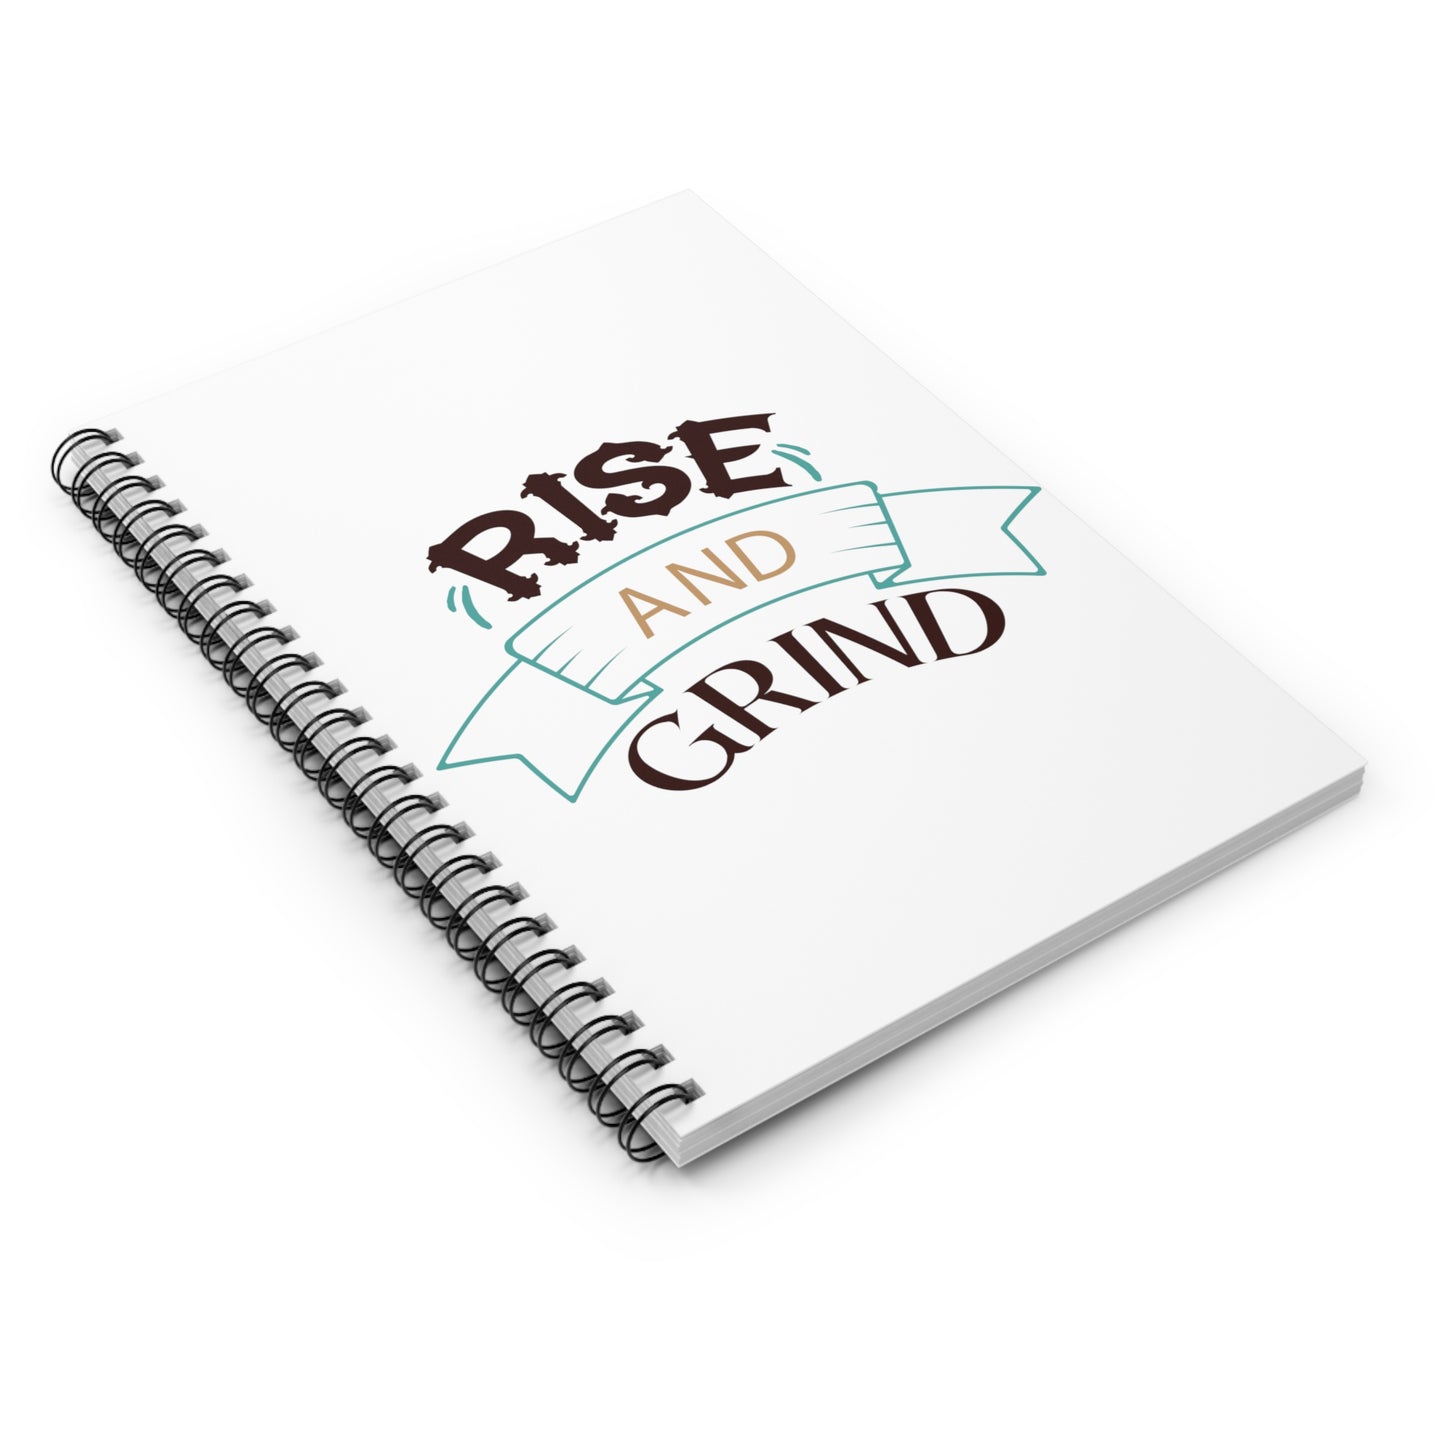 Rise and Grind: Spiral Notebook - Log Books - Journals - Diaries - and More Custom Printed by TheGlassyLass